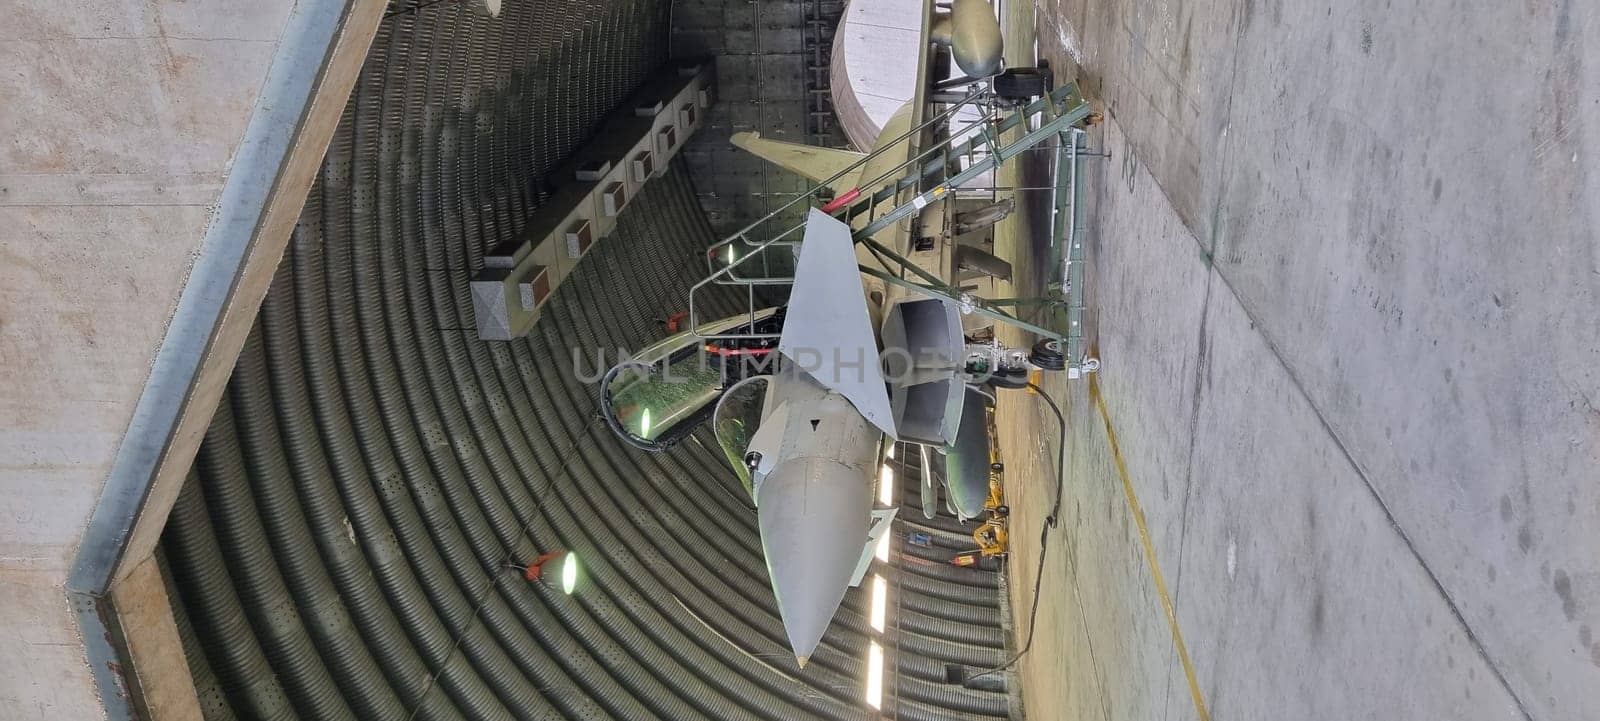 Istrana Italy December 13 2023: Vertical shot of a modern defense aircraft parked in an armored shelter, on alert for immediate takeoff. Perfect for editorial use with ample copy space.